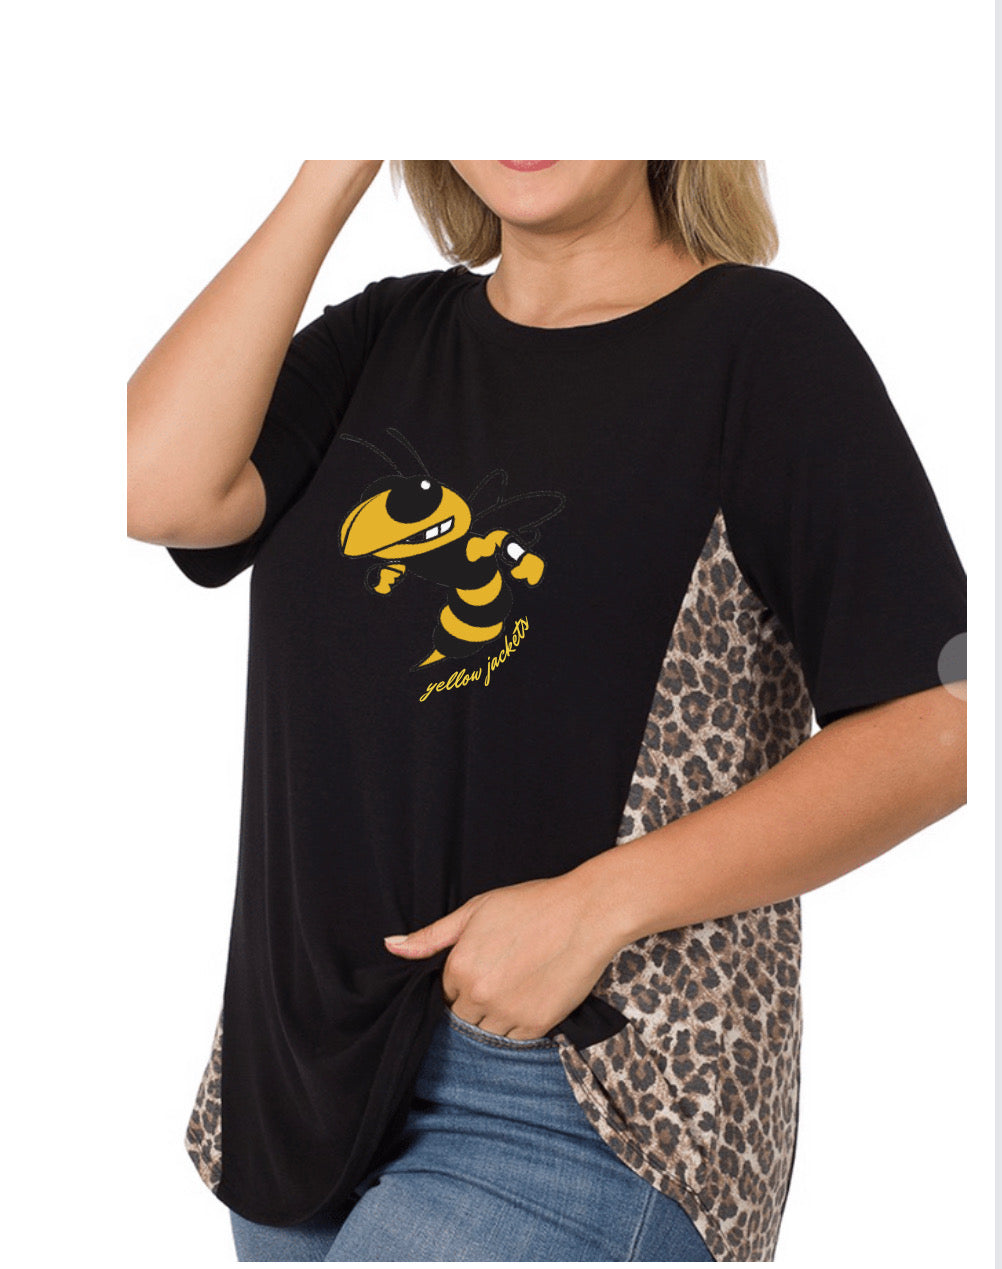 Curvy Gal Yellow Jacket Buzz - Black and Leopard